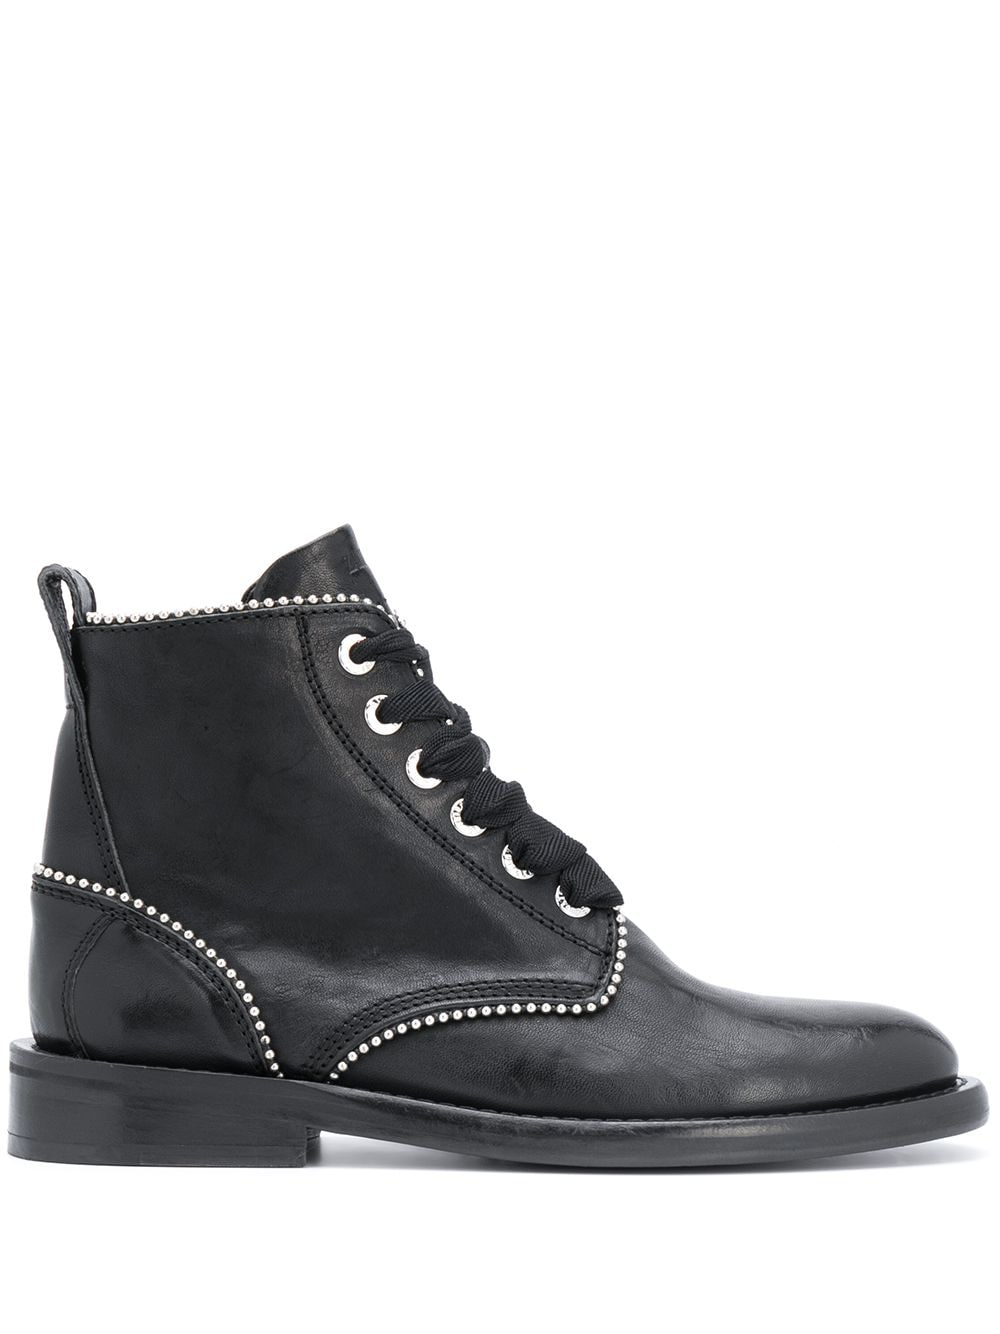 Zadig&Voltaire studded lace-up leather boots - Black von Zadig&Voltaire